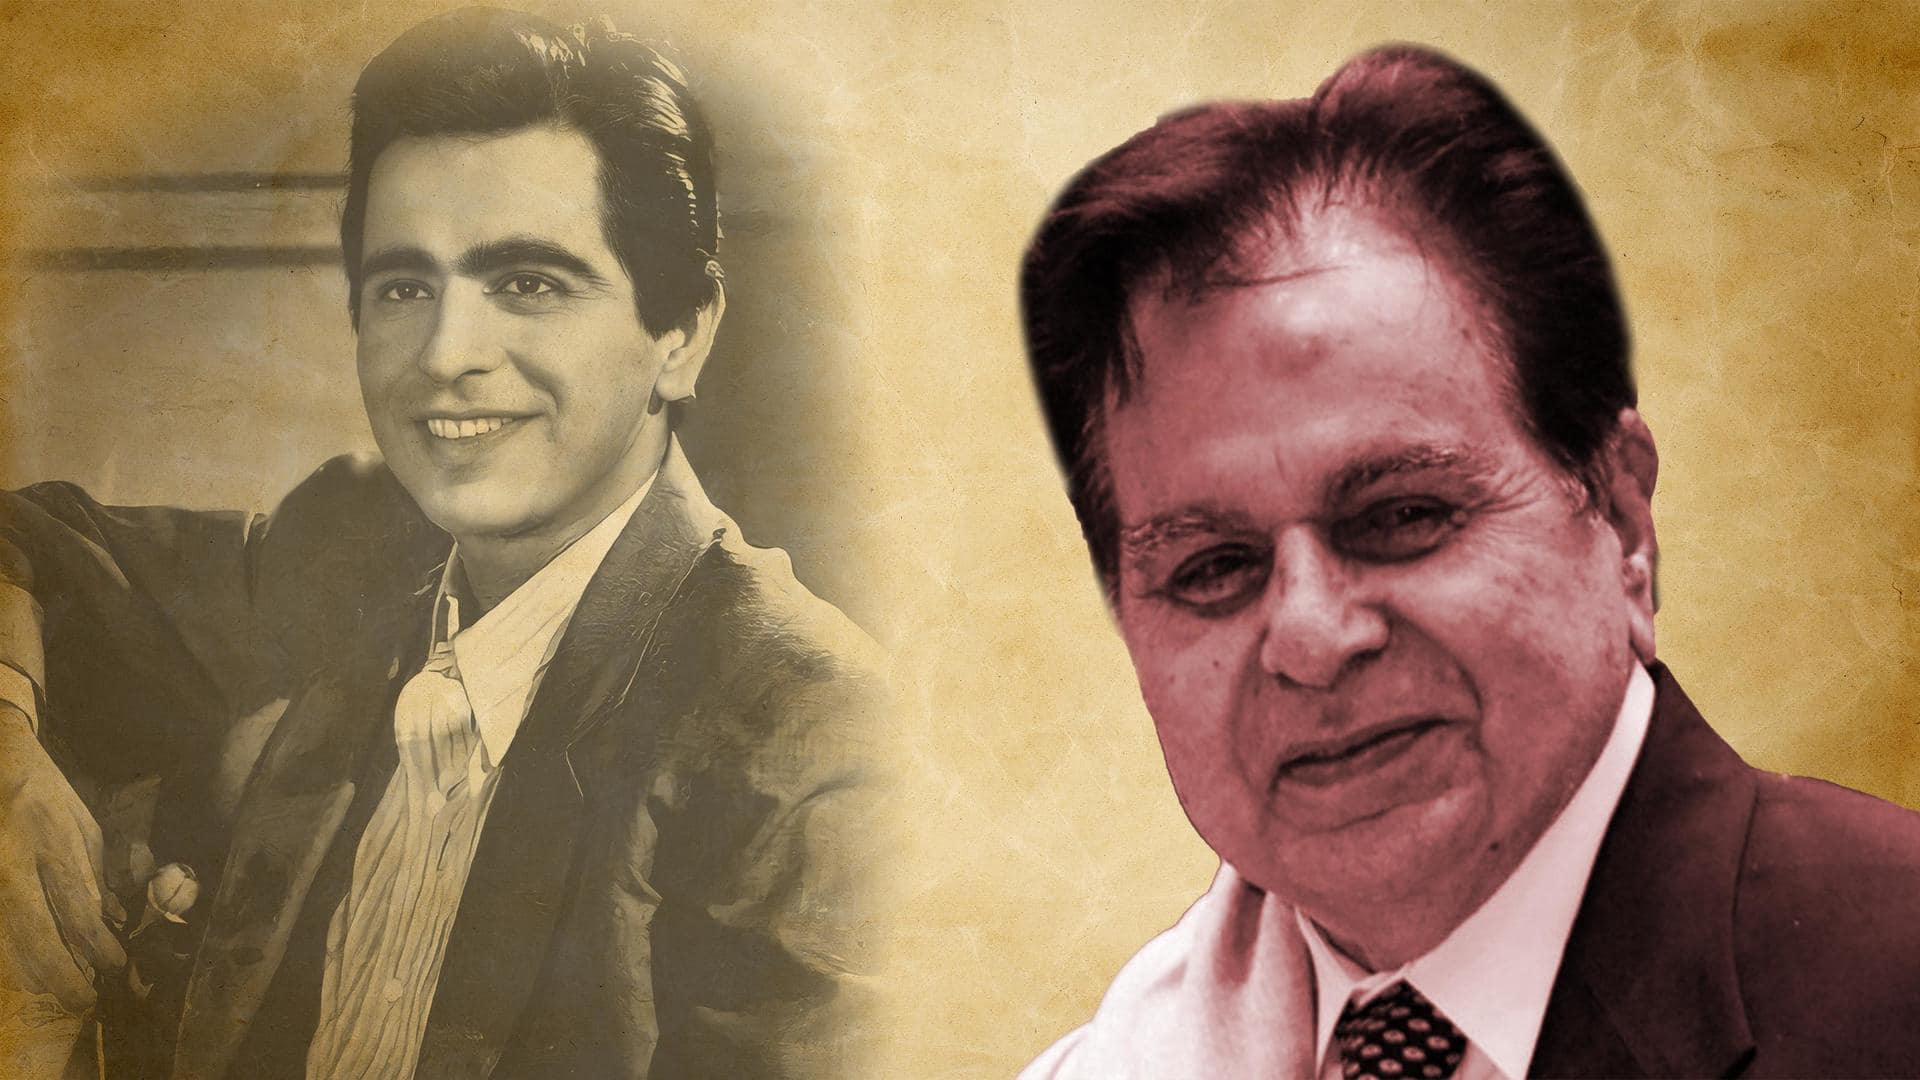 Revisiting Dilip Kumar's iconic films on his 100th birth anniversary